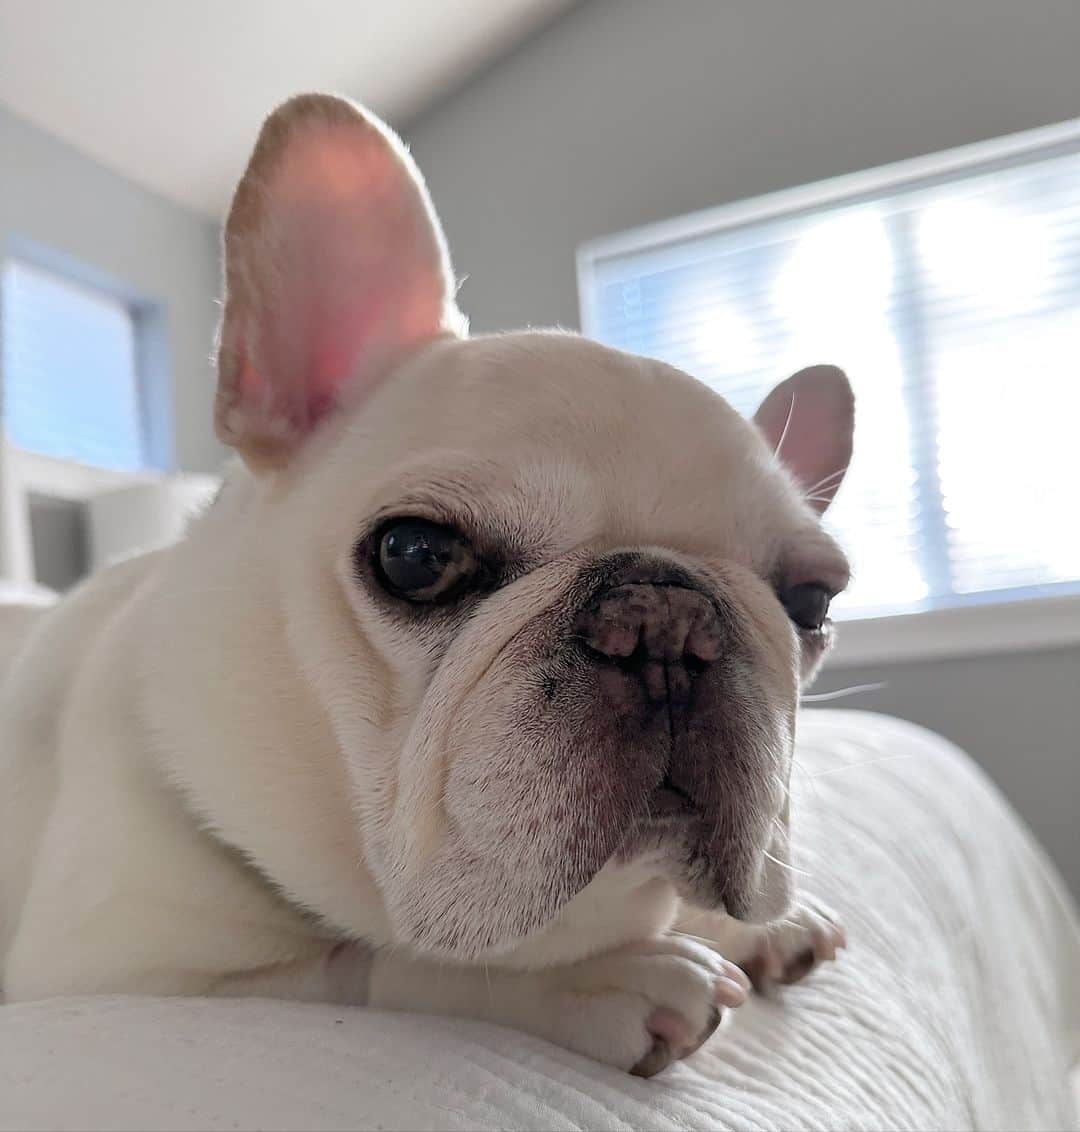 Sir Charles Barkleyのインスタグラム：「Hey furiends! Just wanted to check in and let you all know that I’ve been recovering real well after eye surgery! I’ve been a good boy and haven’t had to wear the cone too much since I mostly sleep all day. Thanks for the well wishes! Have a fantastic weekend!」